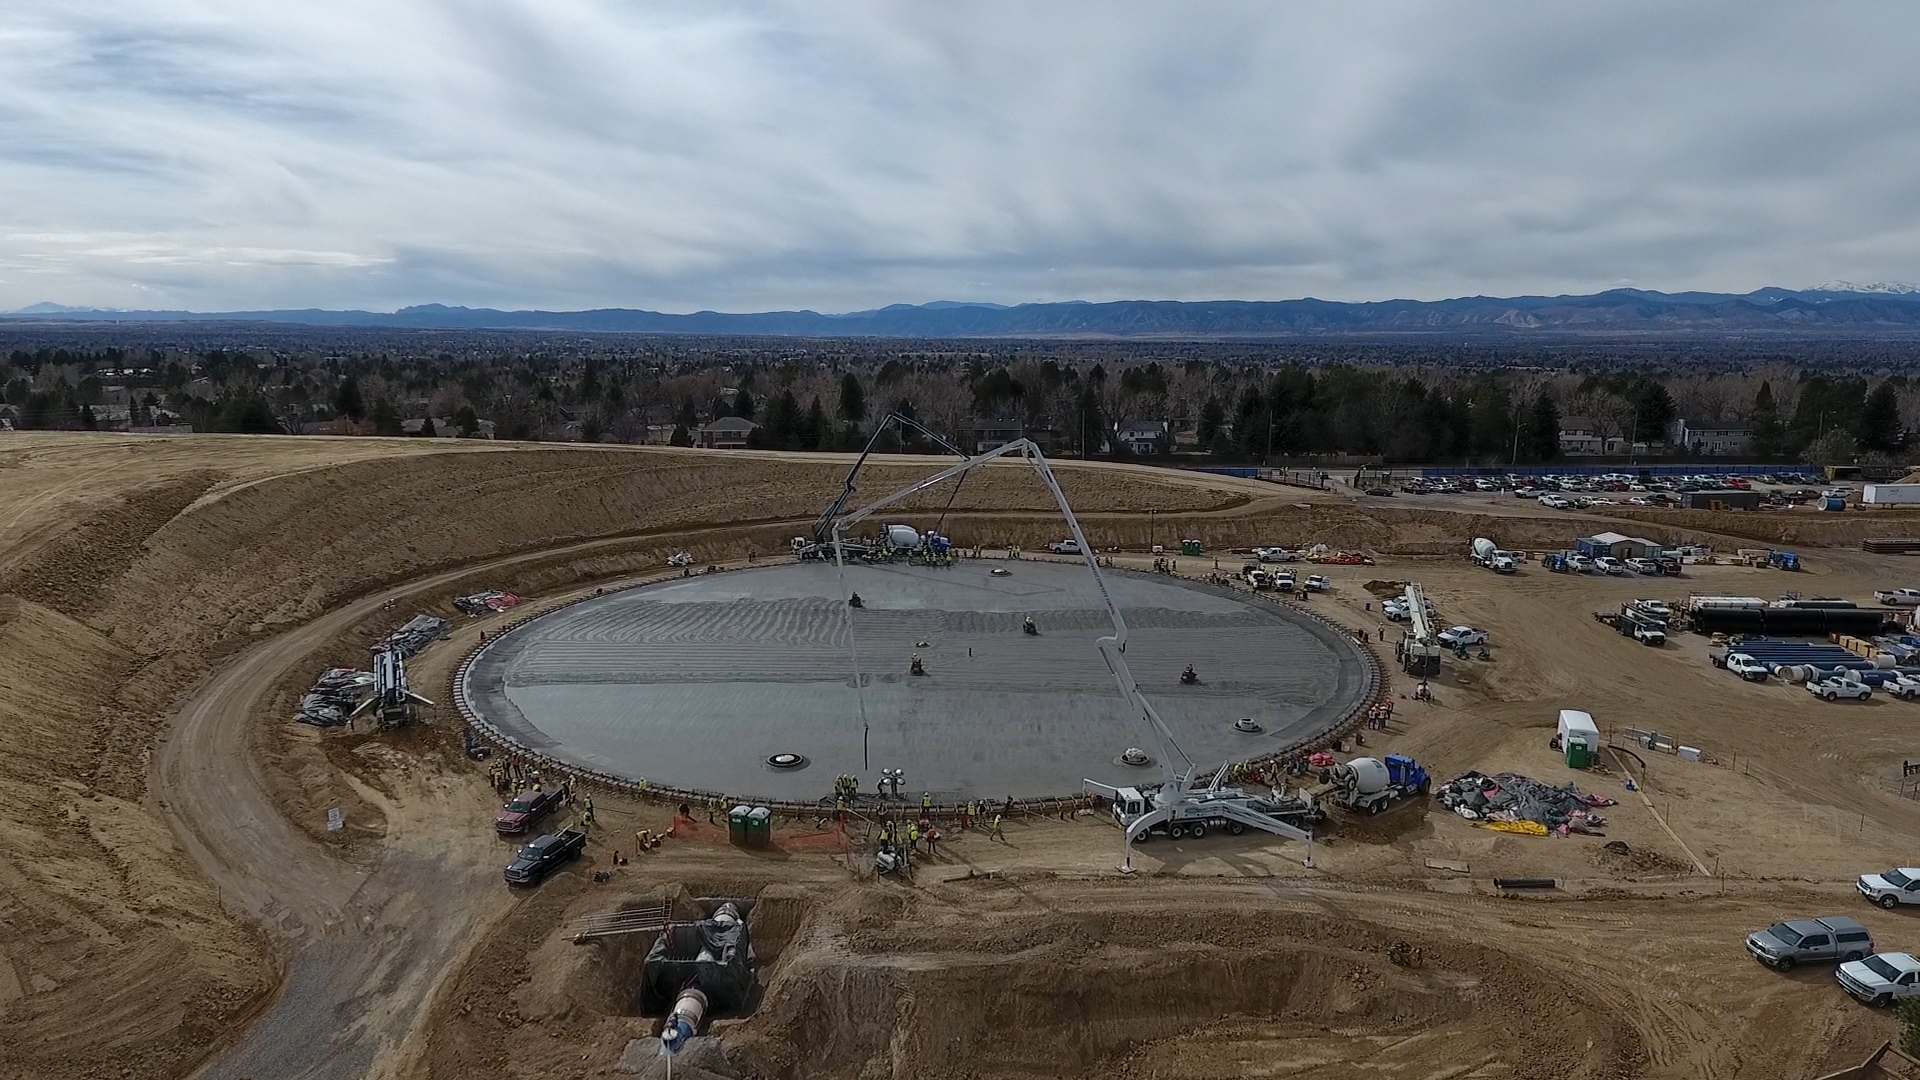 125 construction workers helped pour the concrete foundation for a new water storage tank at the Hillcrest site on Feb. 18, 2017.